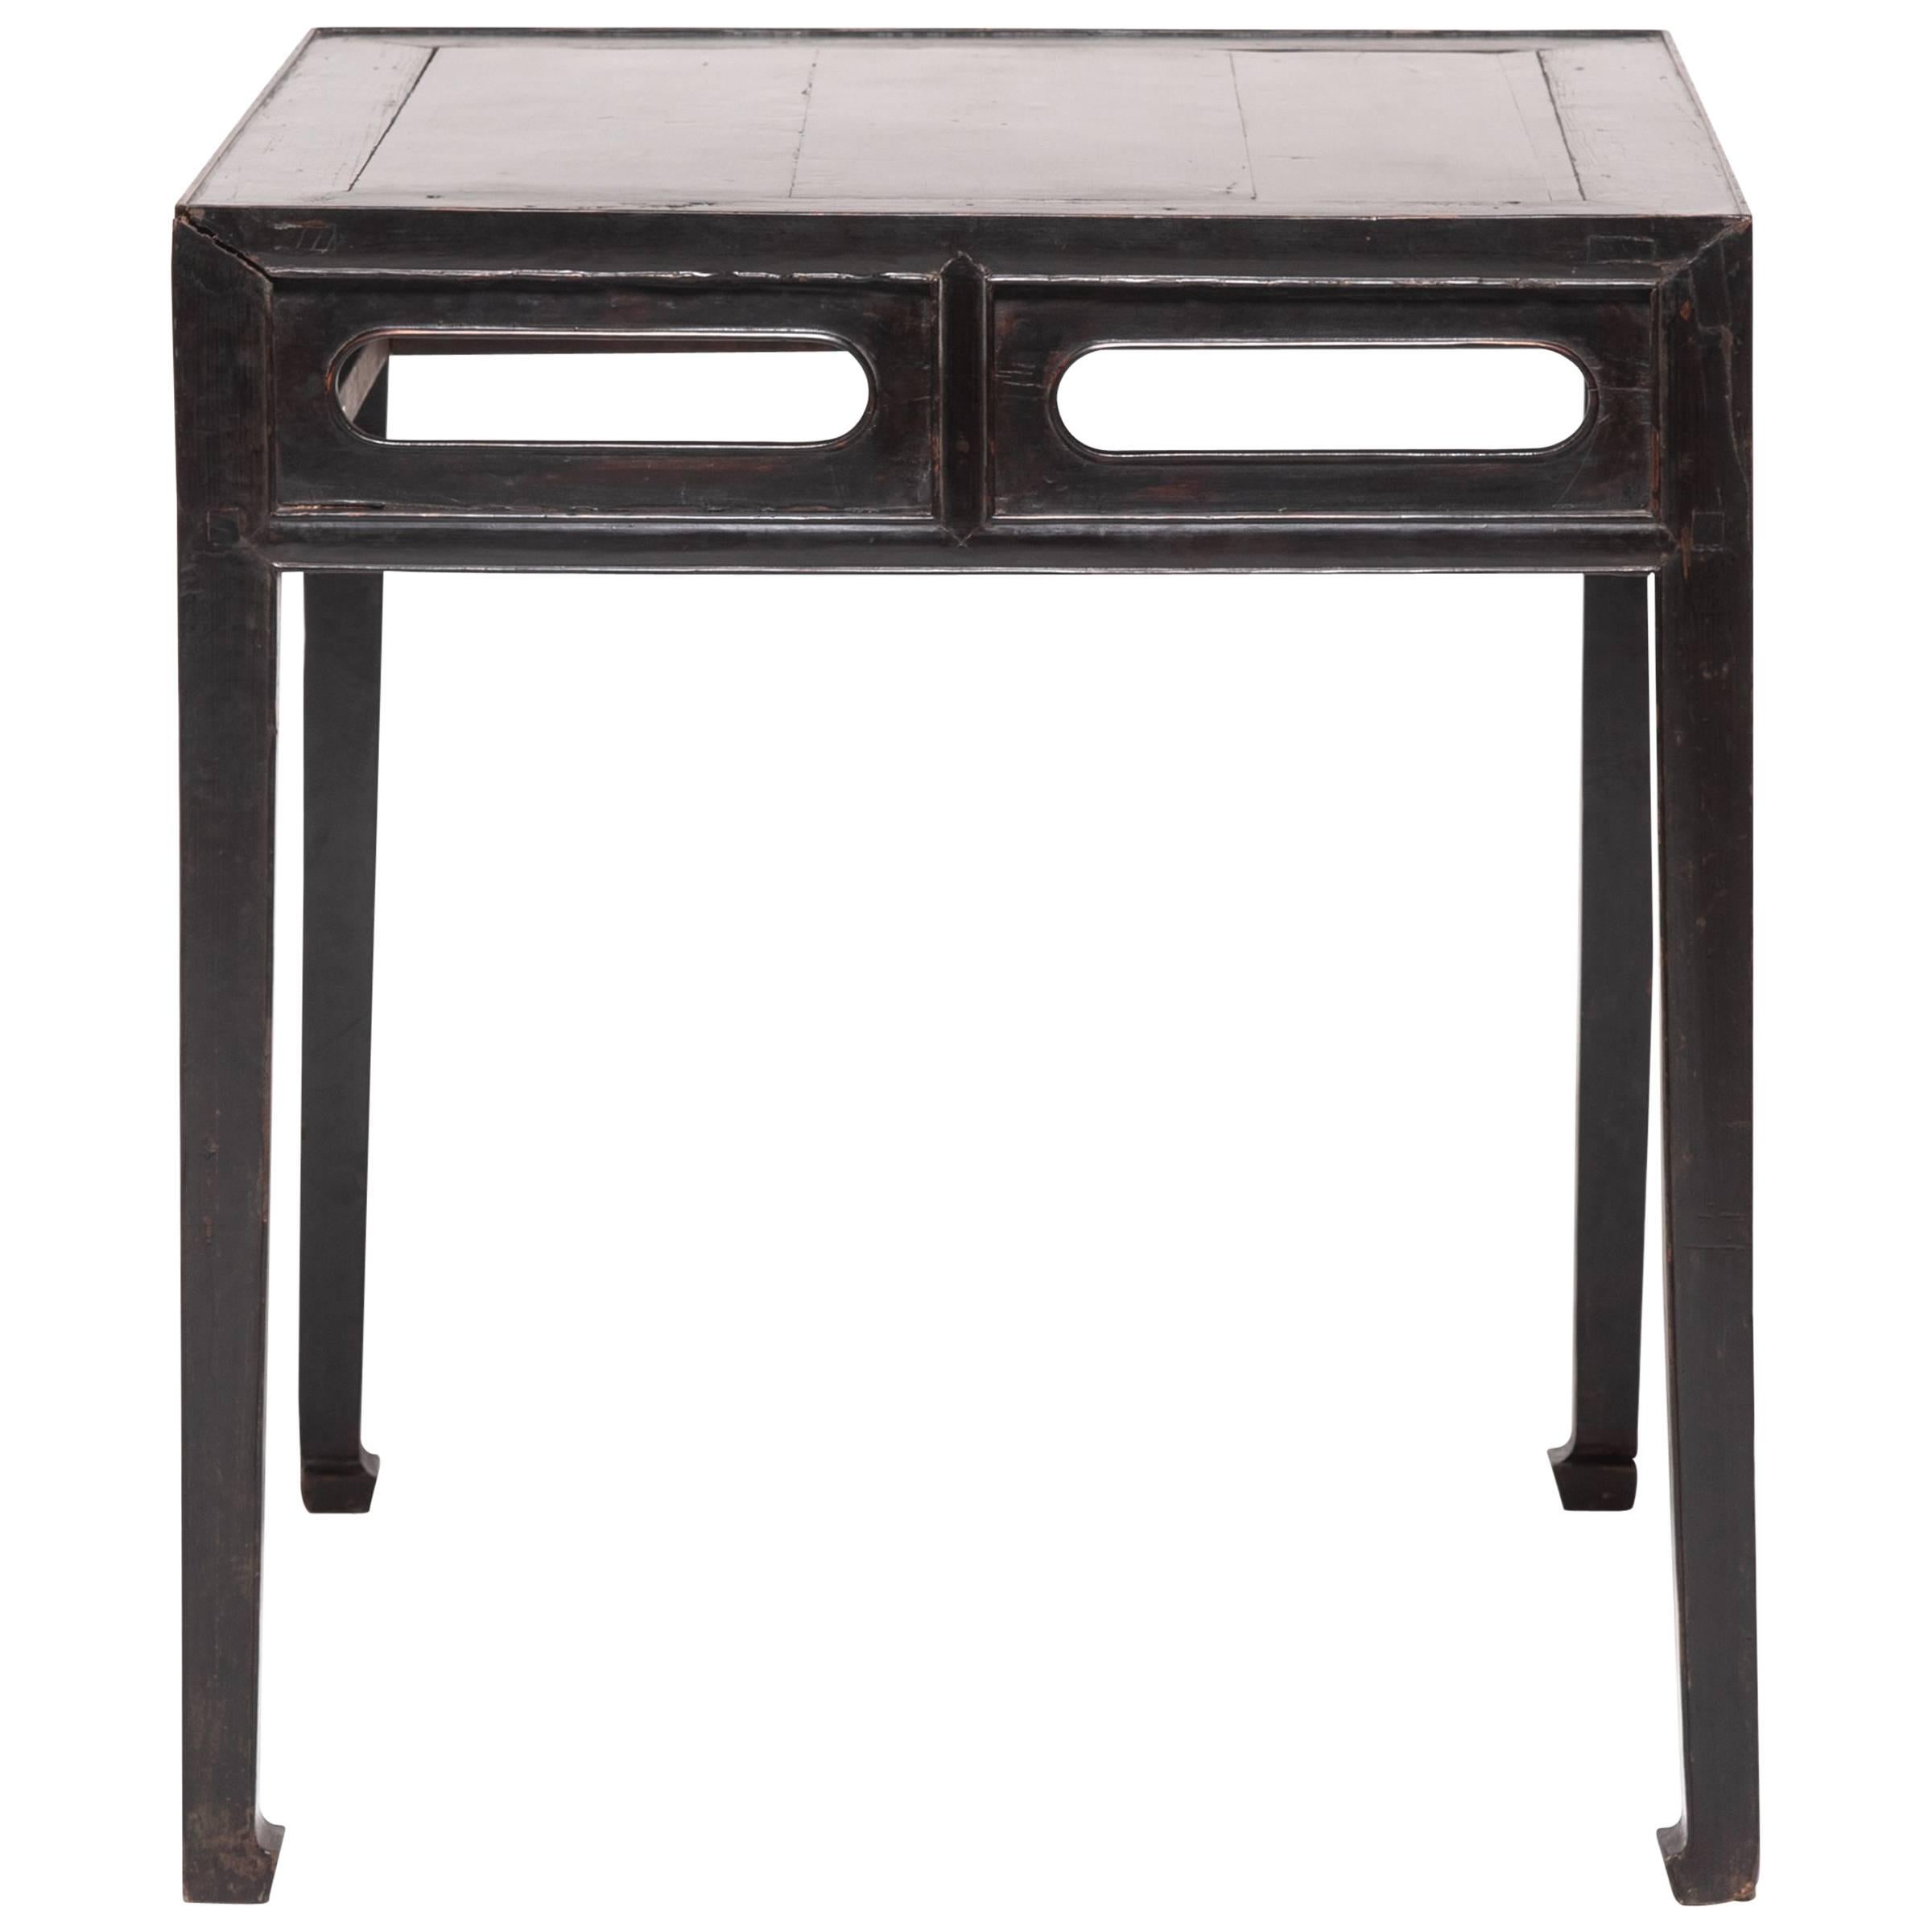 Chinese Black Lacquer Square Table with Hoof Feet